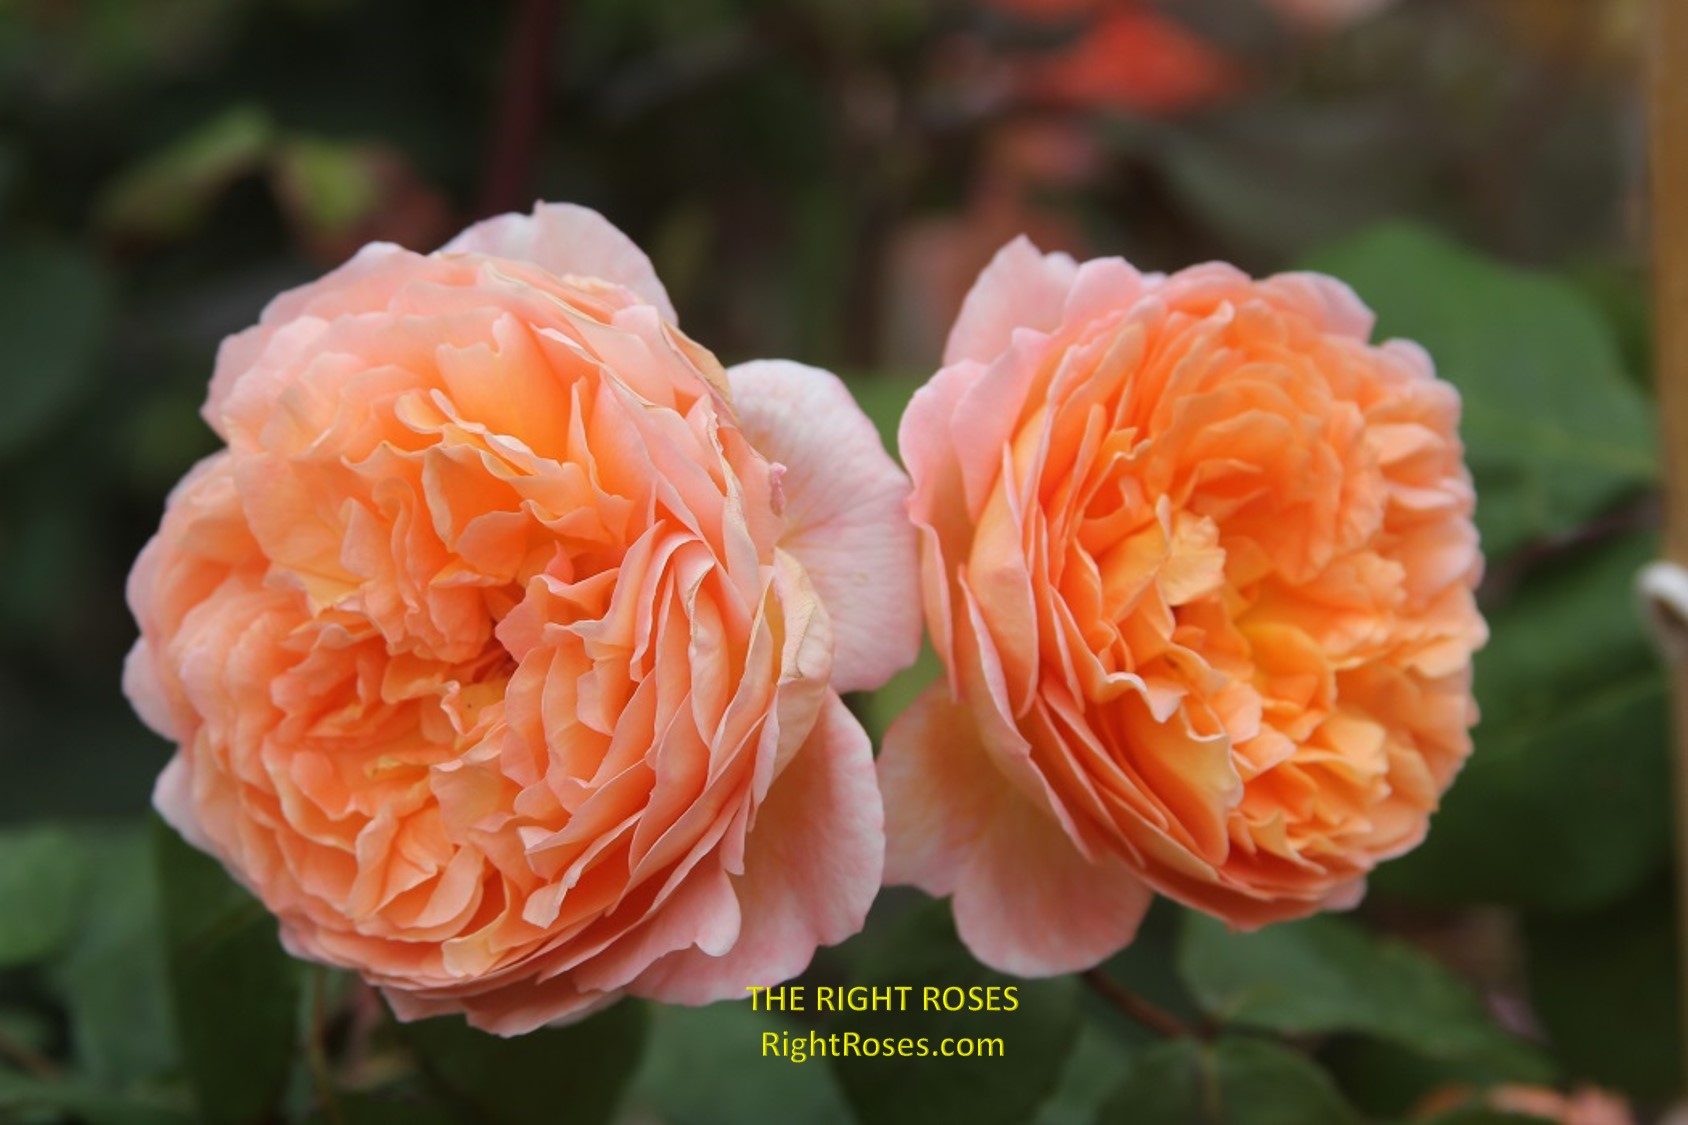 lady emma hamilton rose review the right roses score best top garden store david austin english roses rose products rose rating the right leap rose food fertilizer